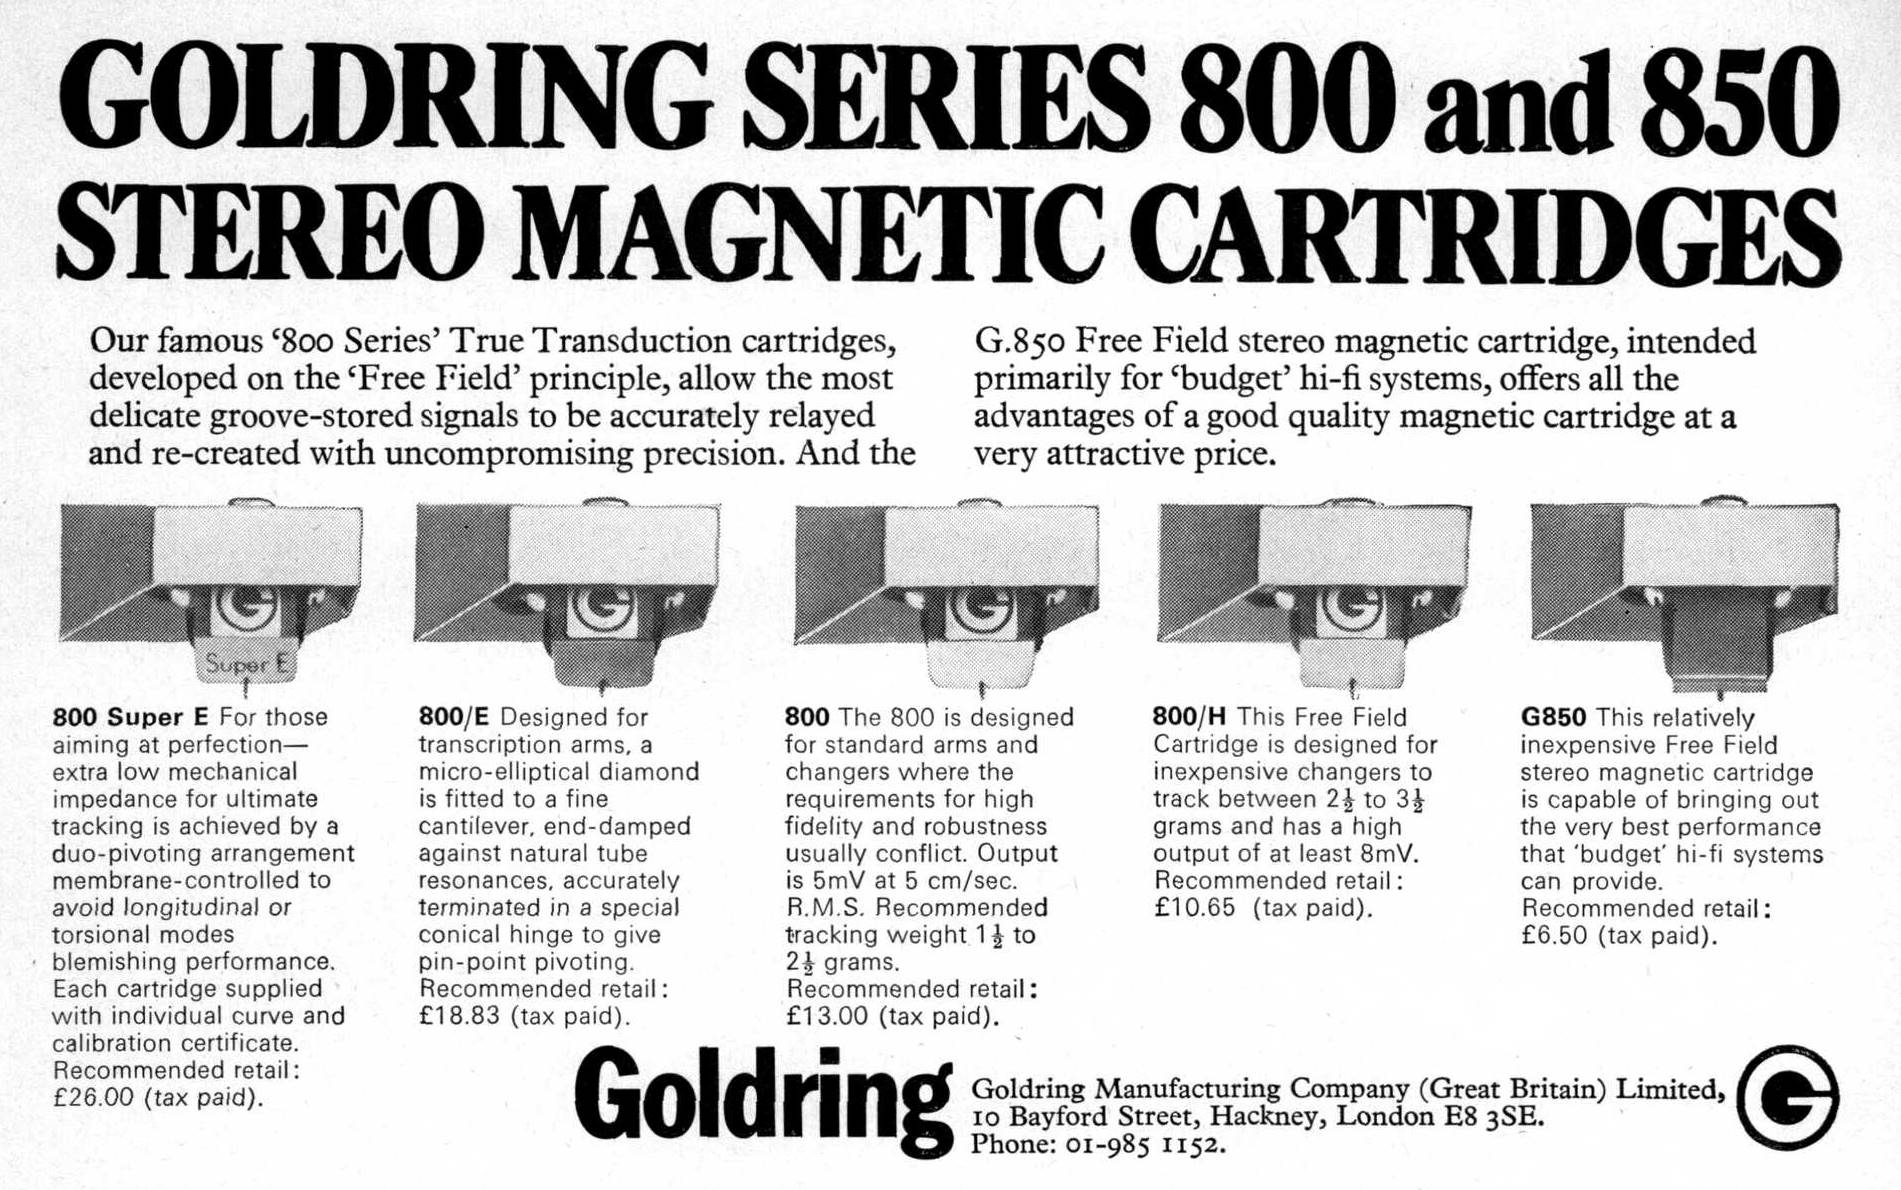 GOLDRING SERIES 800 STEREO MAGNETIC CARTRIDGES